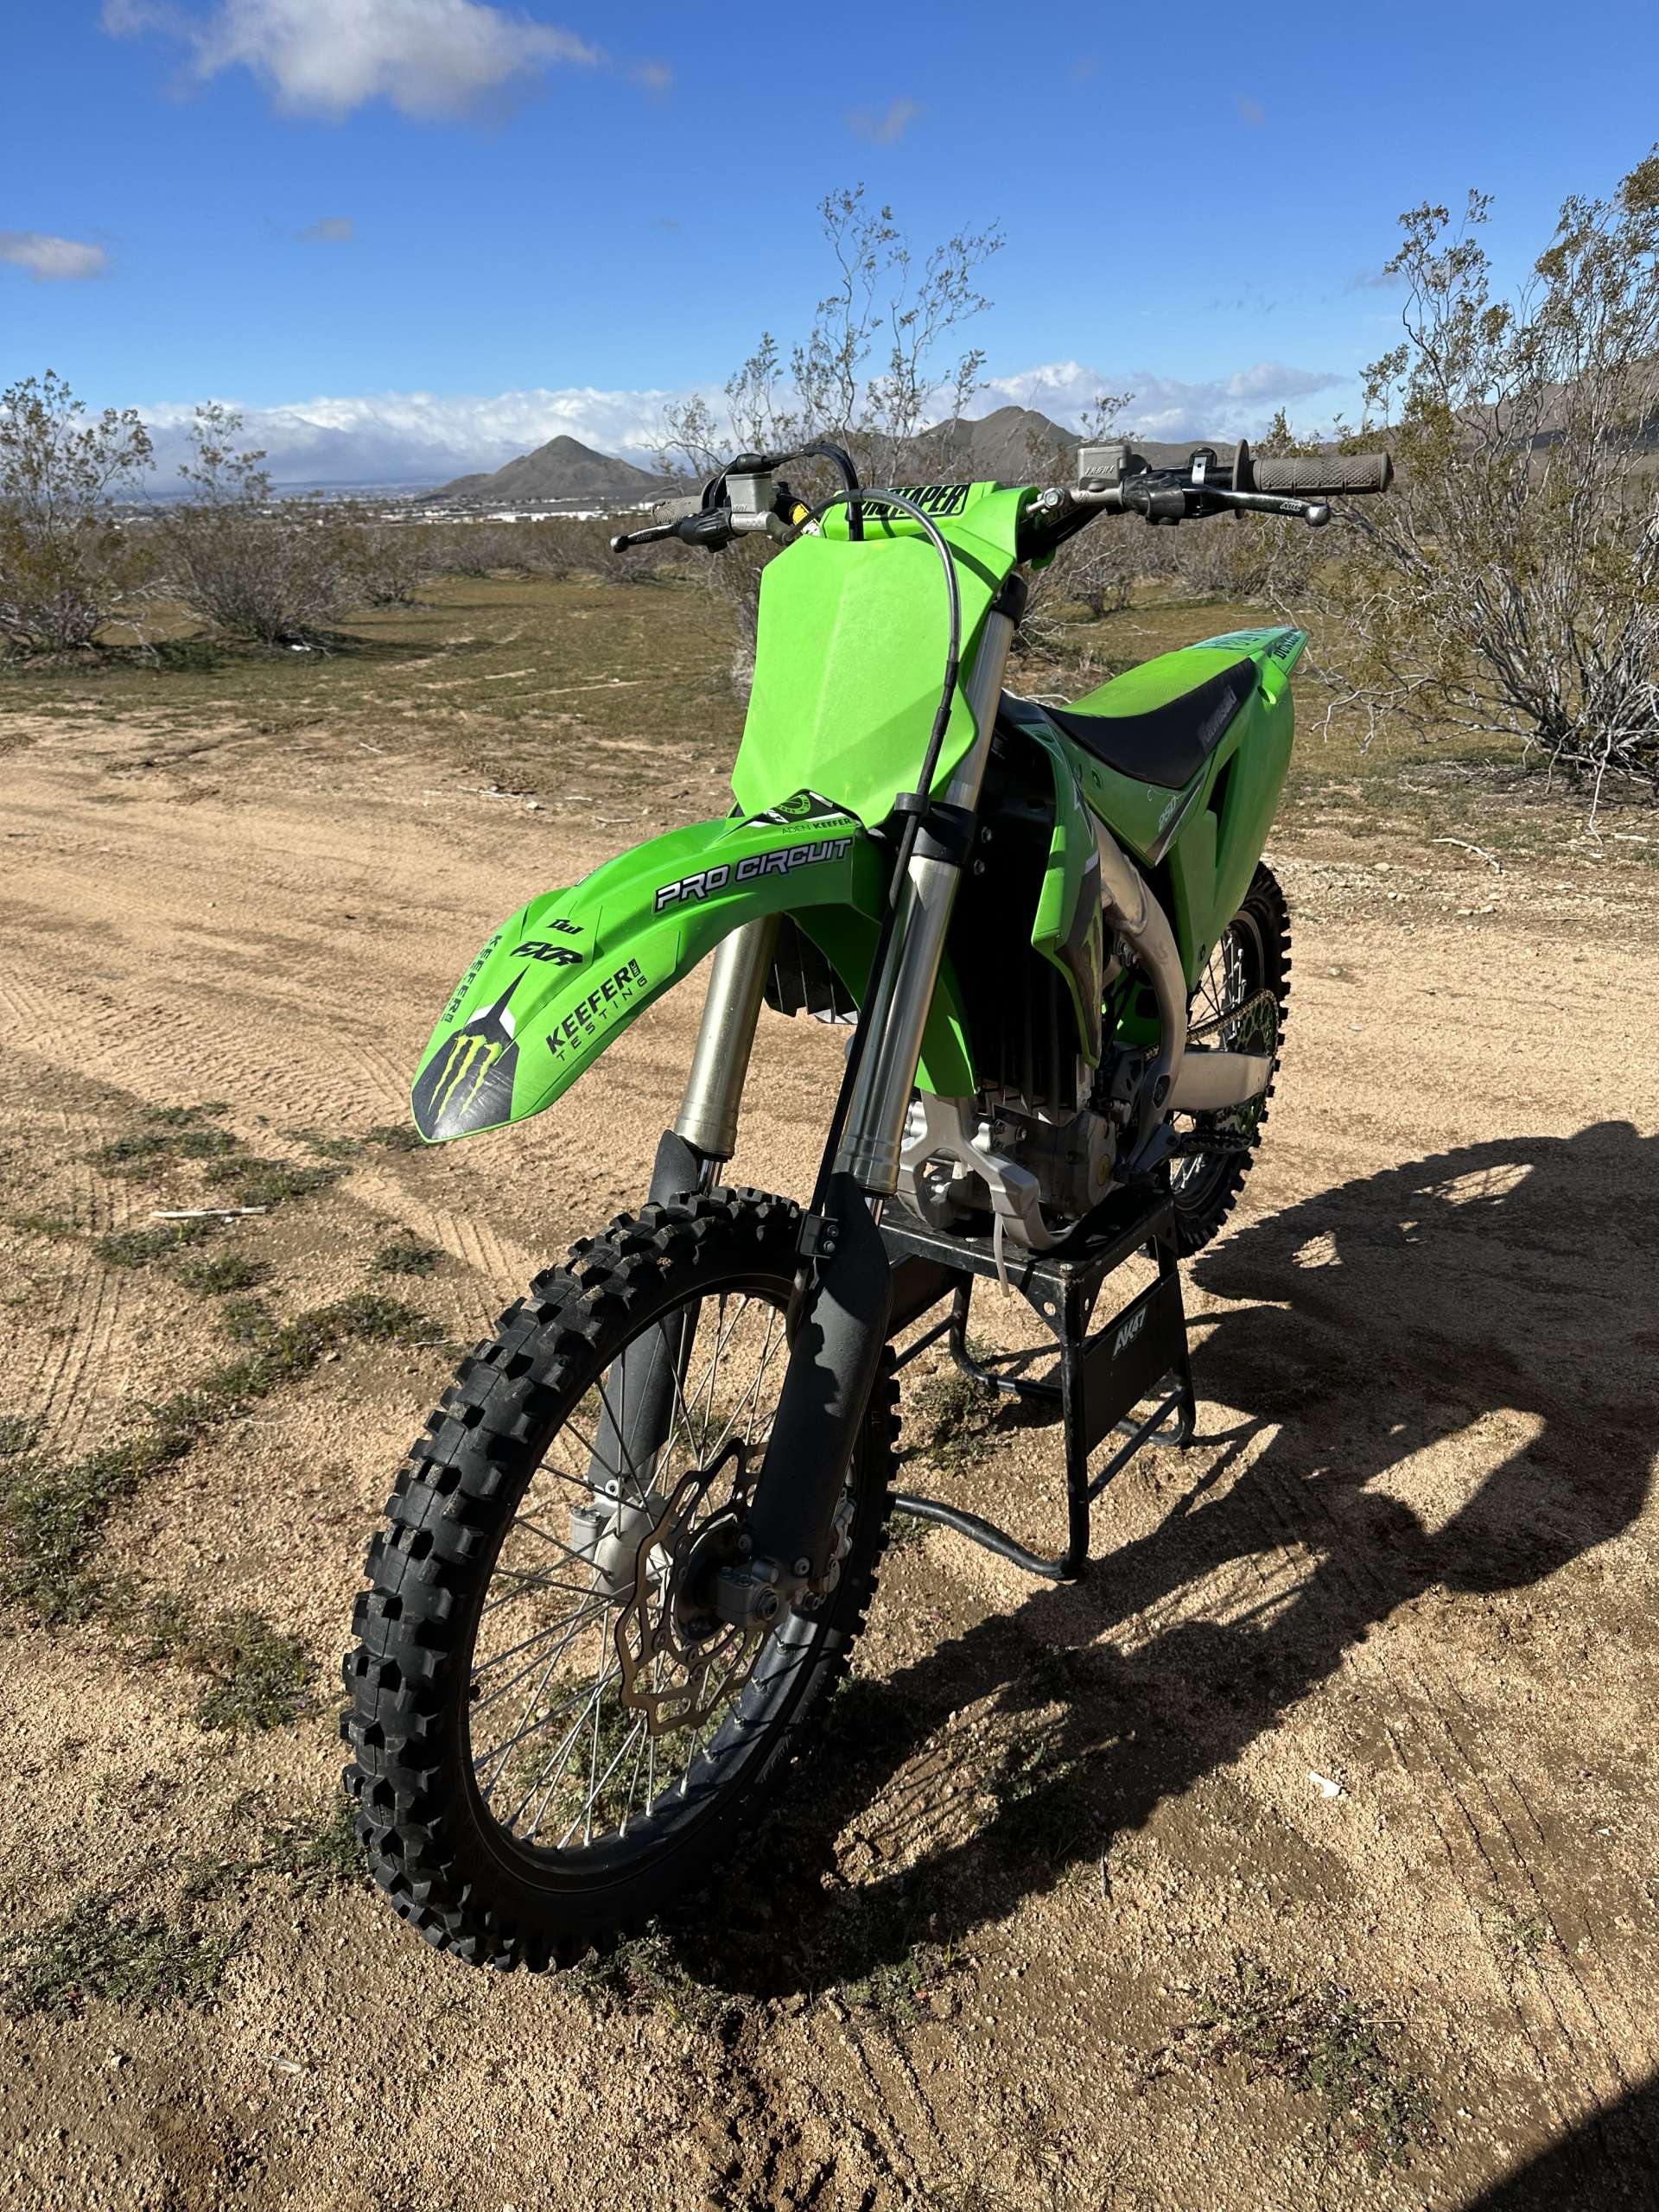 Living With 50 Hours On The Kawasaki KX250 (56.1 To Be Exact) Keefer